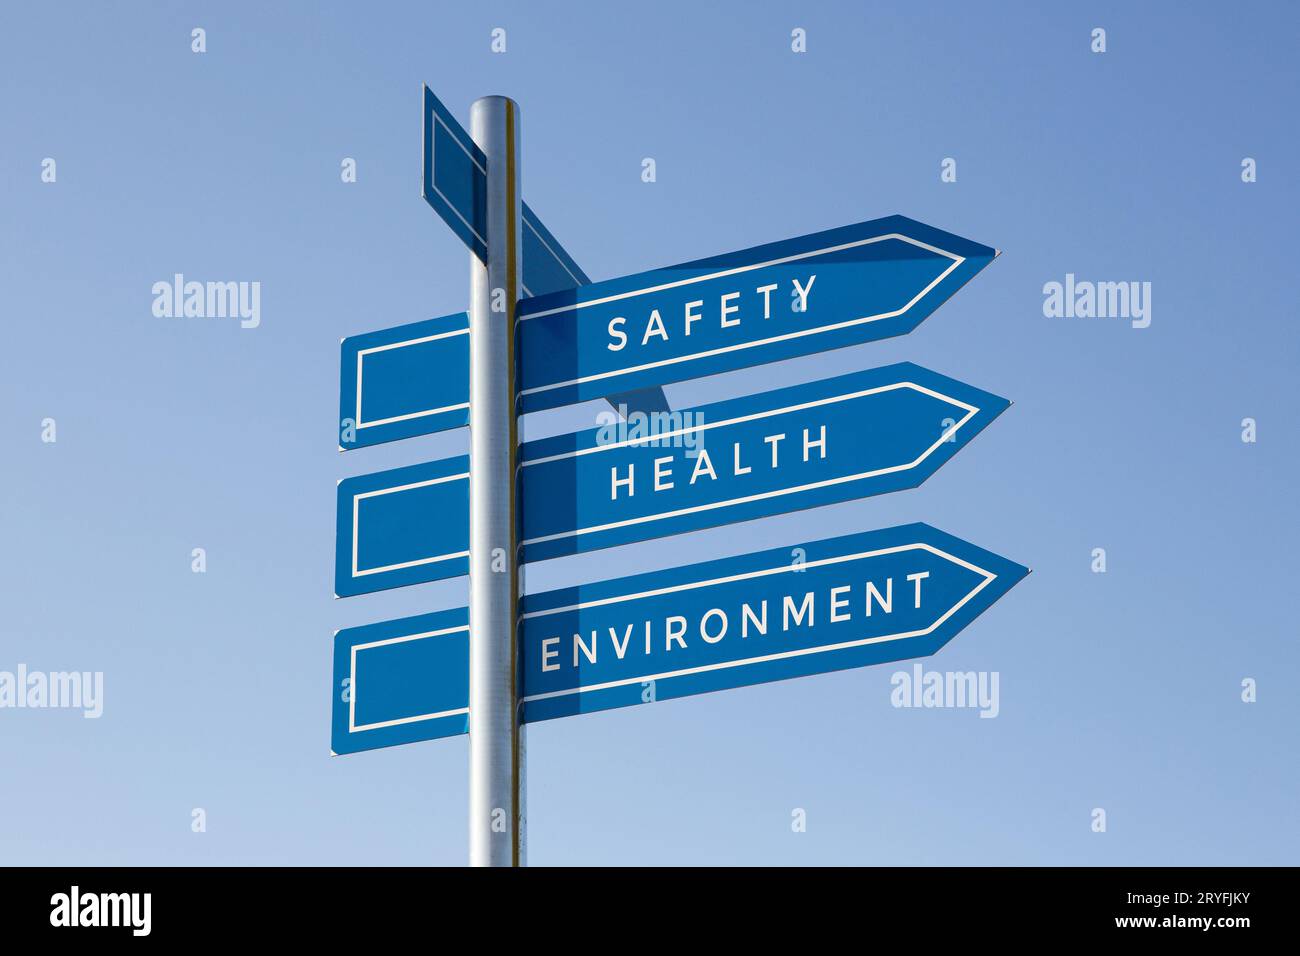 Safety, health, environment on signpost on blue sky. Healthy lifestyle concept Stock Photo